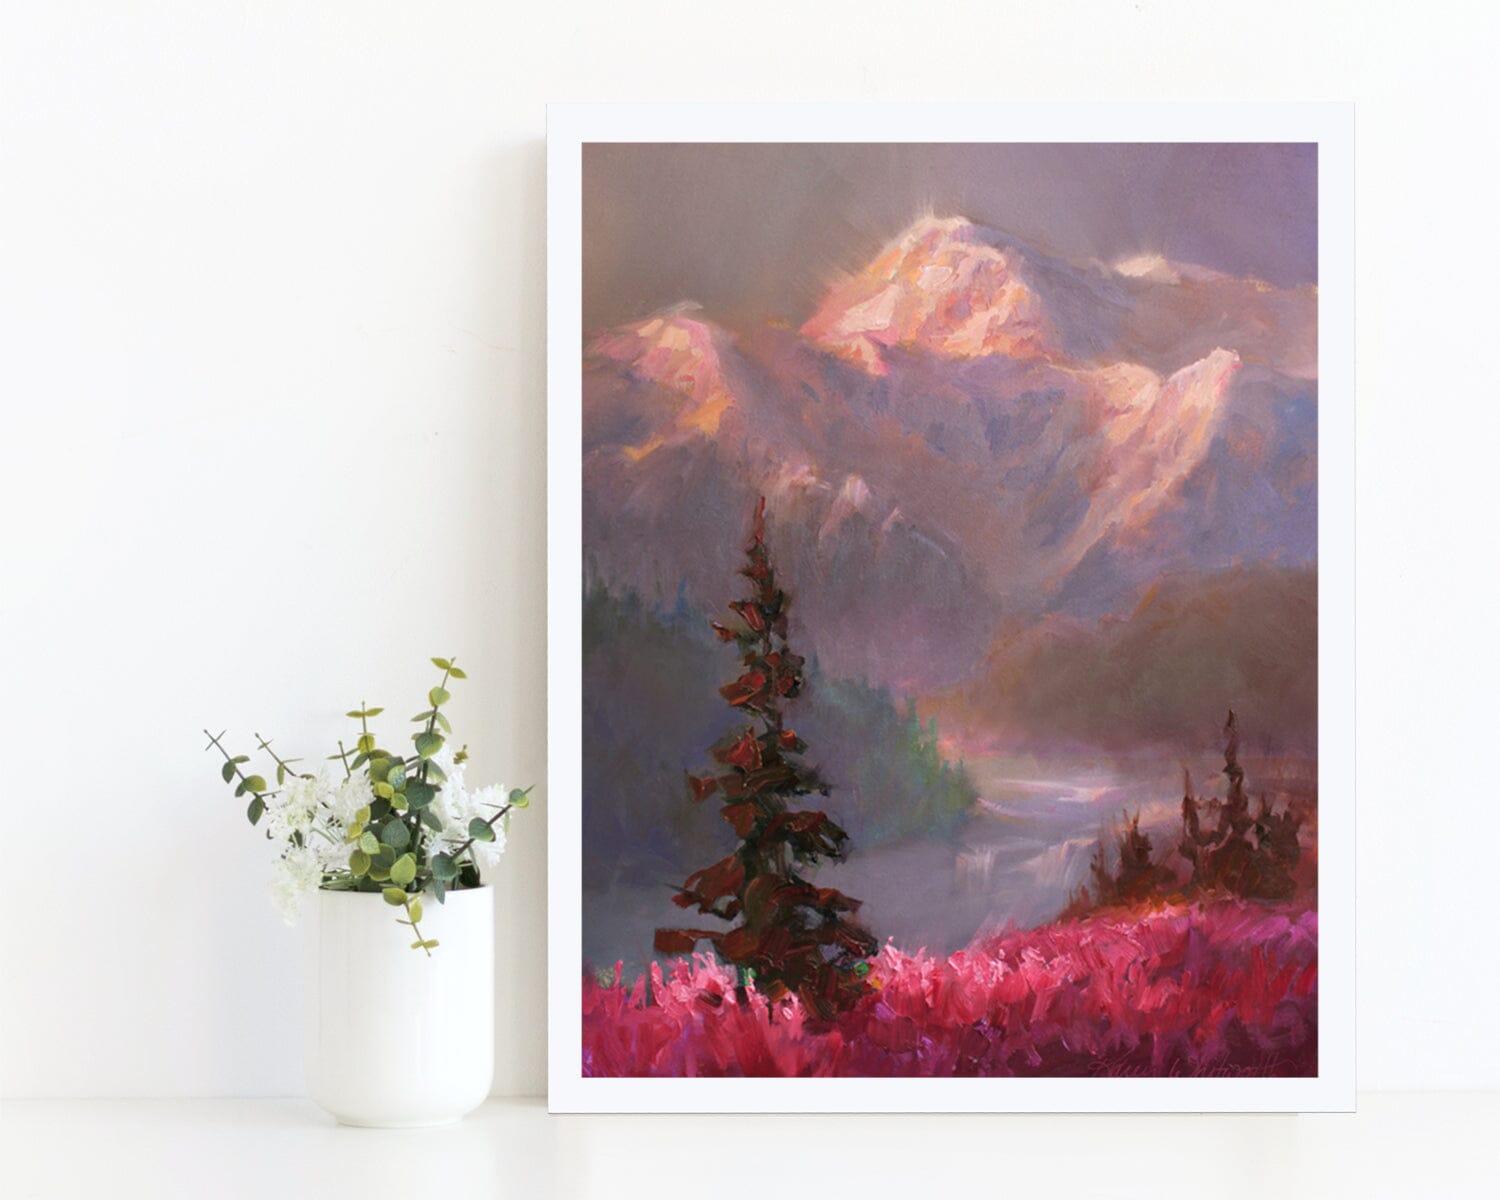 Alaska Art Prints of Denali mountain landscape wall art. A painting of wildflowers and landscape by Karen Whitworth is shown with white background.